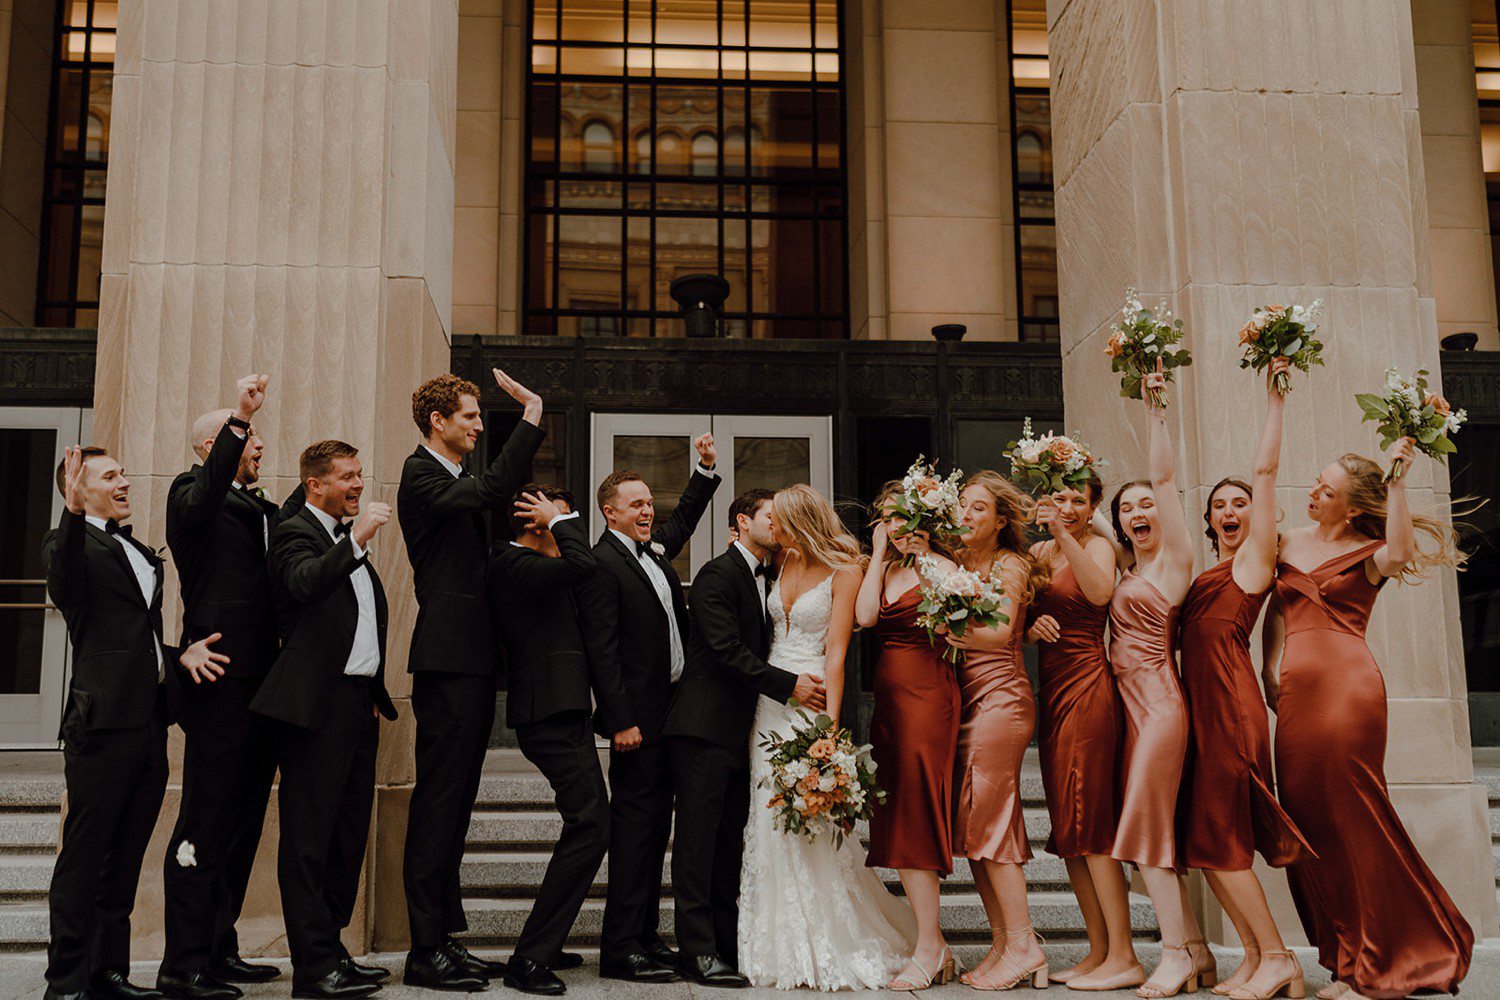 Wedding Party Photos in Grand Rapids 